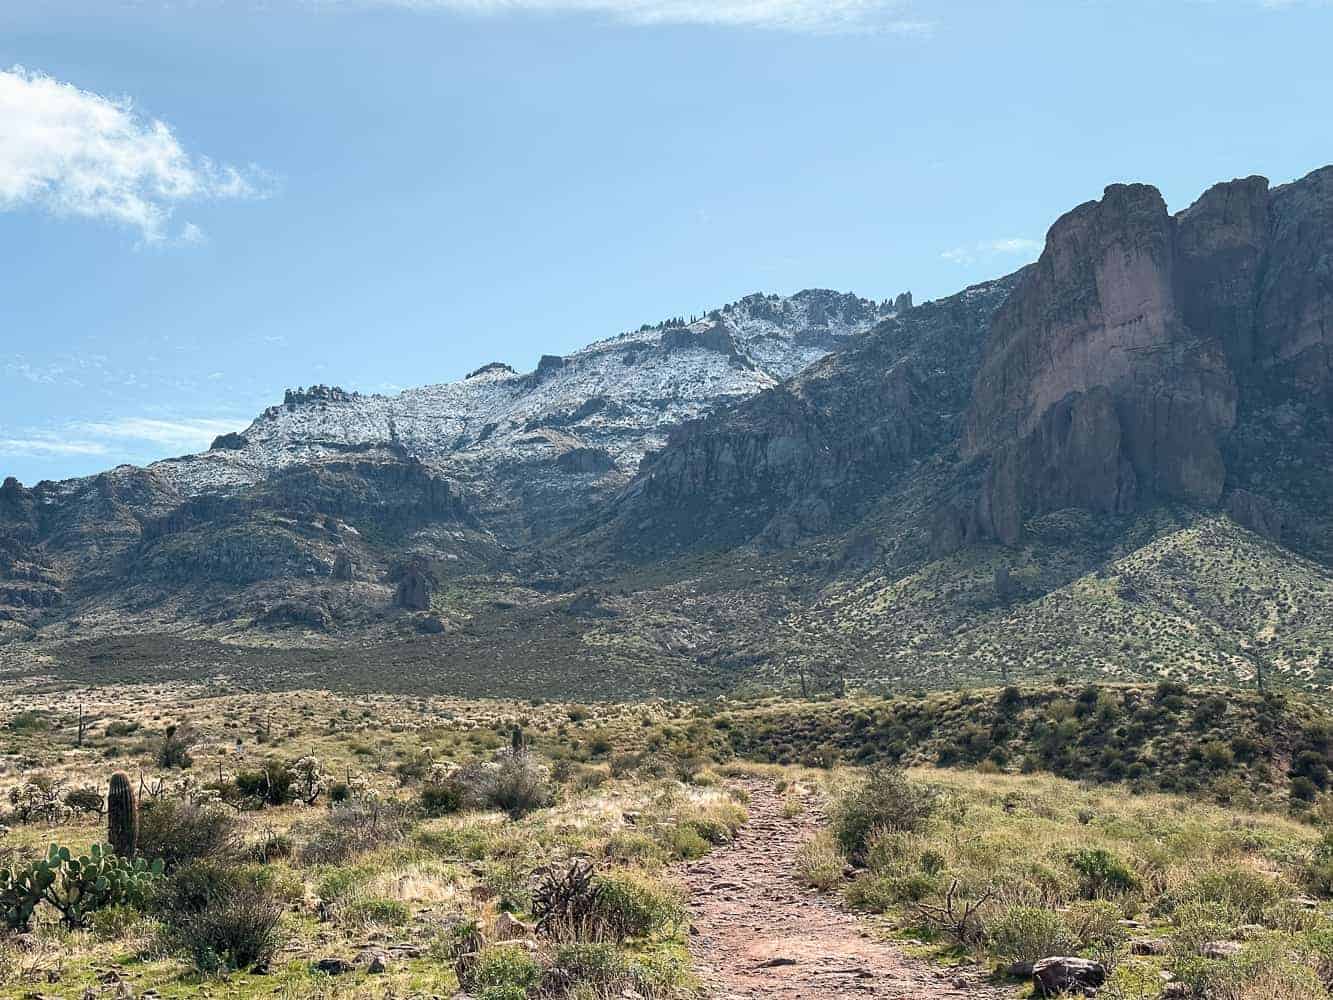 Snowcapped Superstition Mountains.